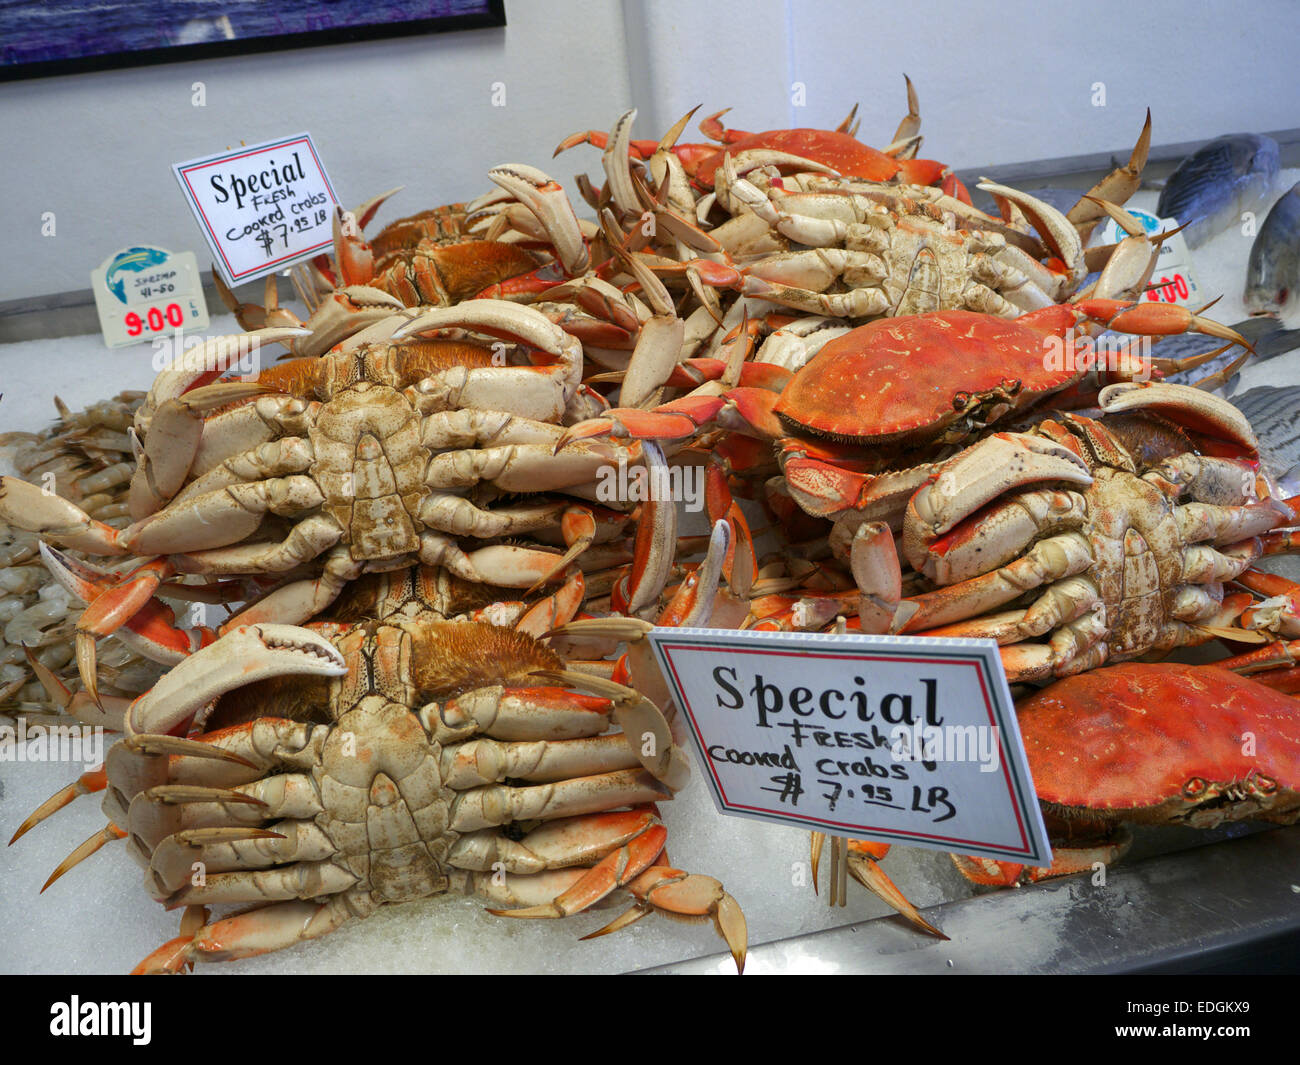 Dungeness crab Freshly cooked on sale with dollar price tag at Monterey Fish Market California USA Stock Photo